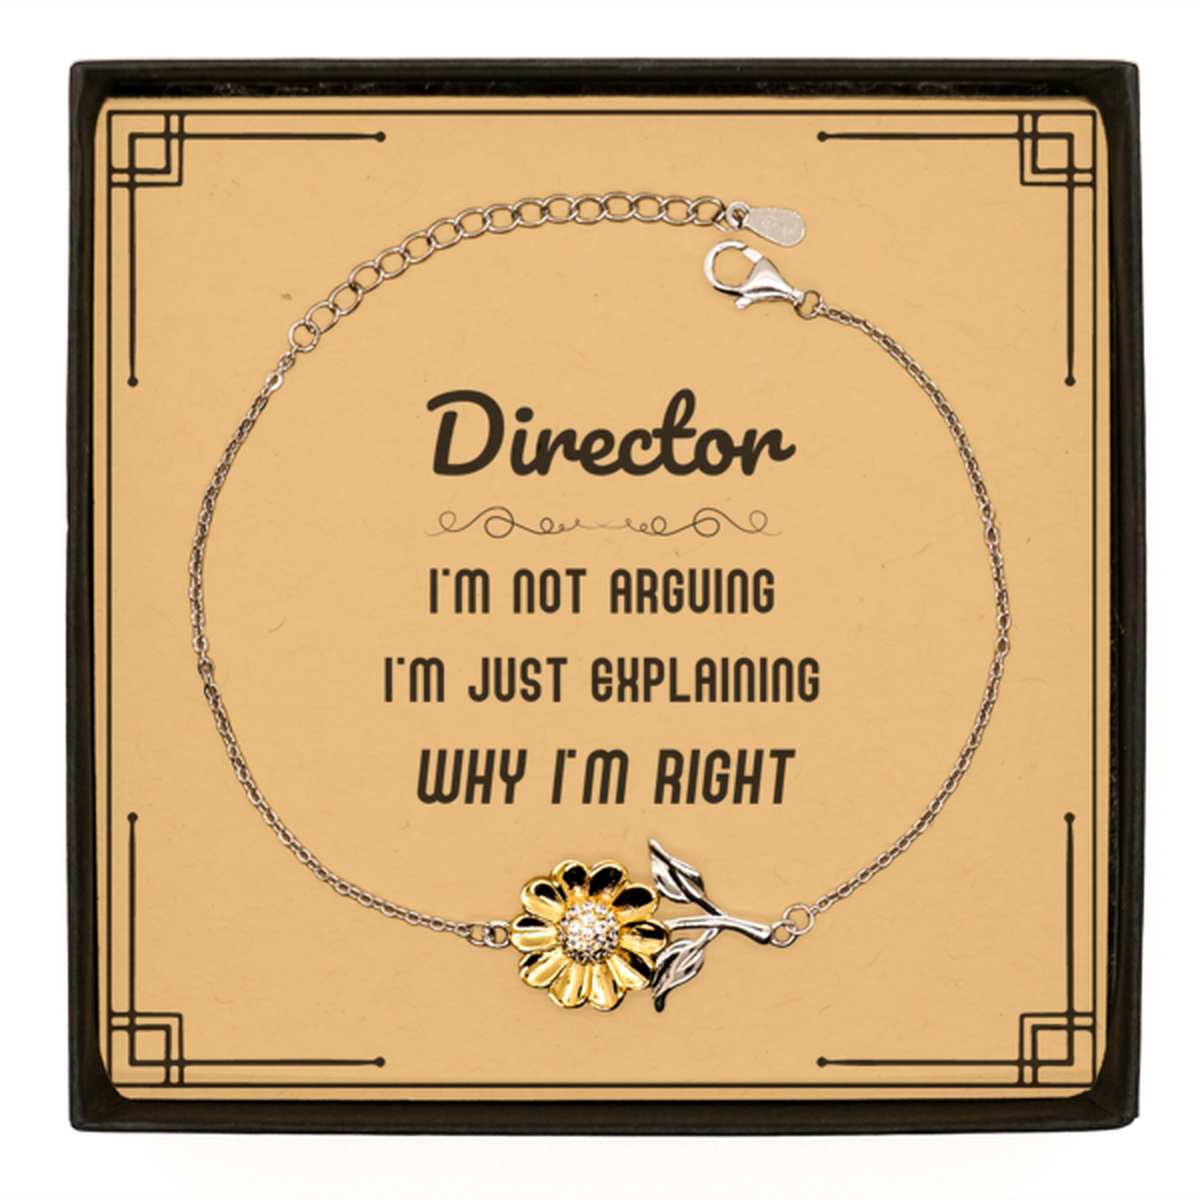 Director I'm not Arguing. I'm Just Explaining Why I'm RIGHT Sunflower Bracelet, Funny Saying Quote Director Gifts For Director Message Card Graduation Birthday Christmas Gifts for Men Women Coworker